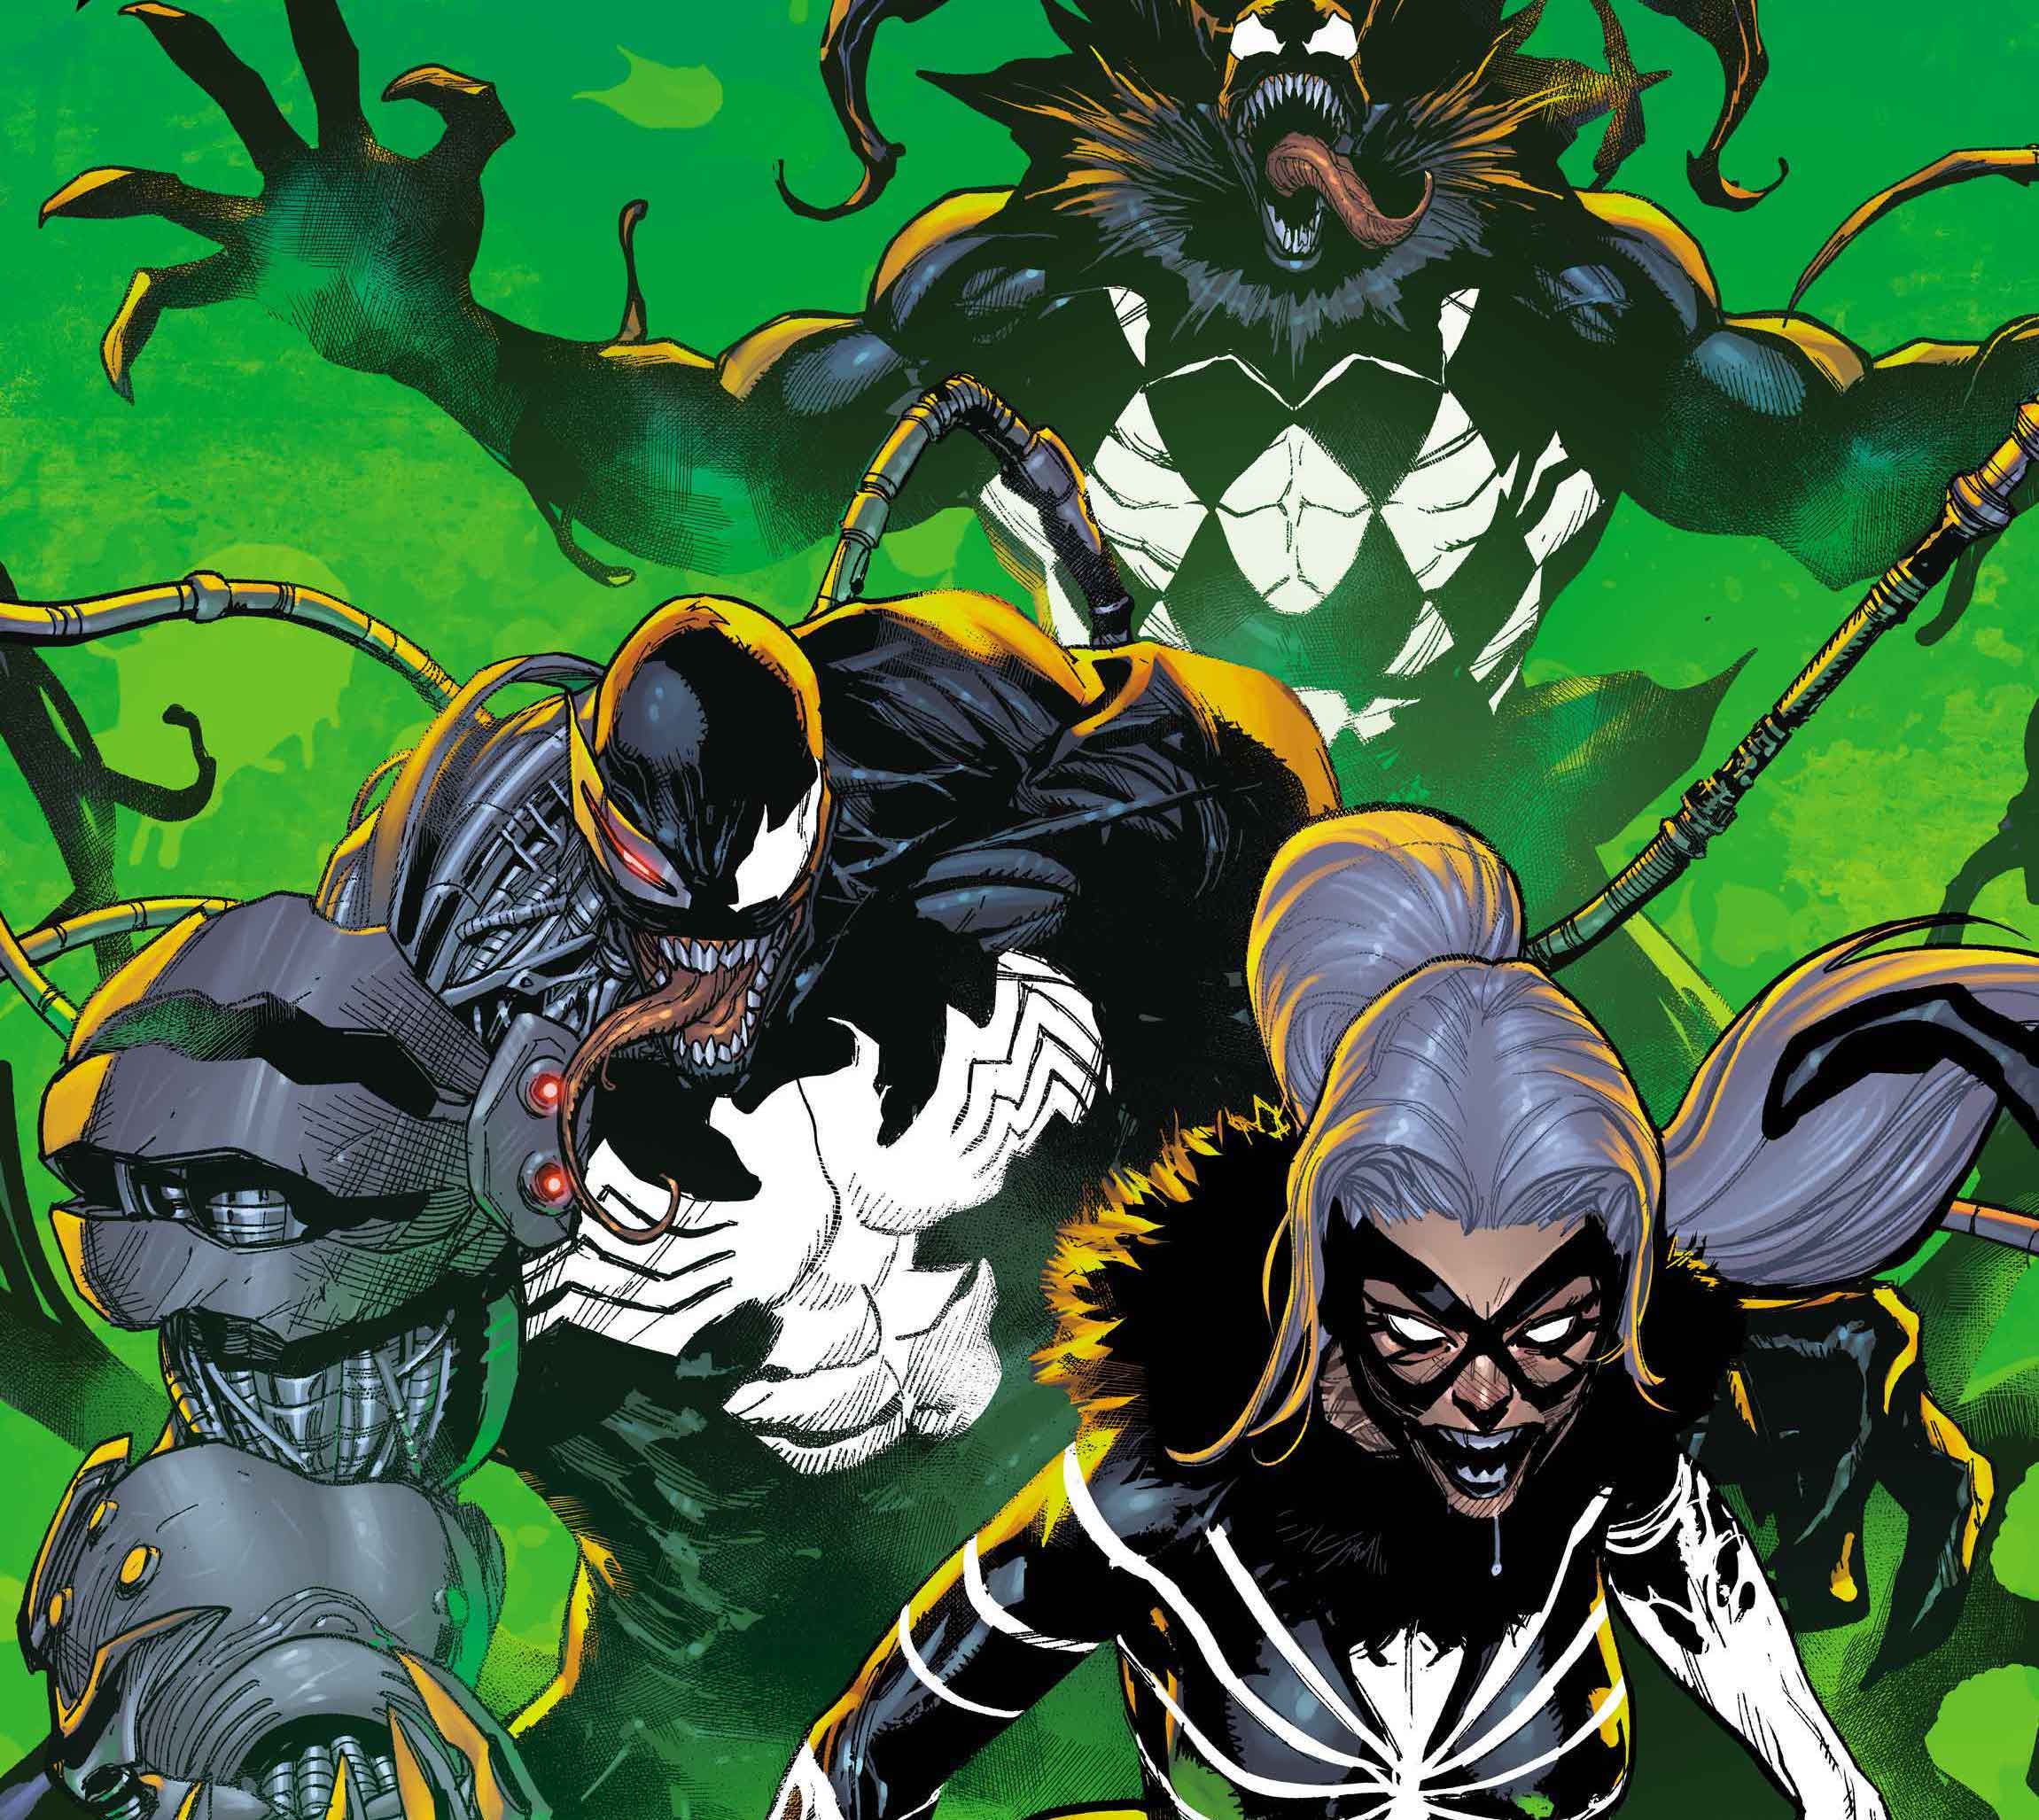 Marvel teases more Symbiotes for 'Extreme Venomverse' #2